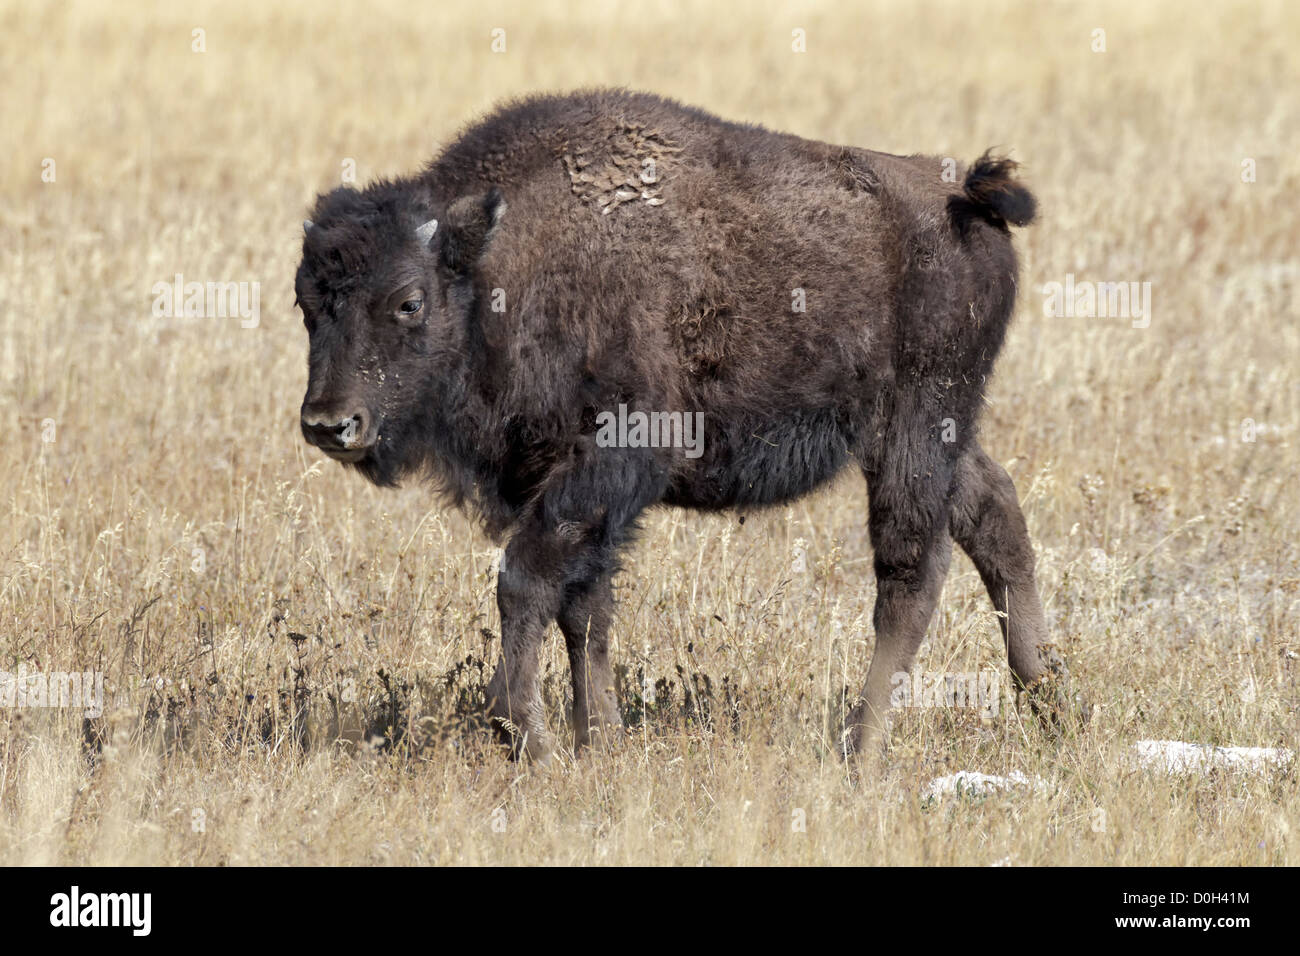 A young calf American Bison Stock Photo